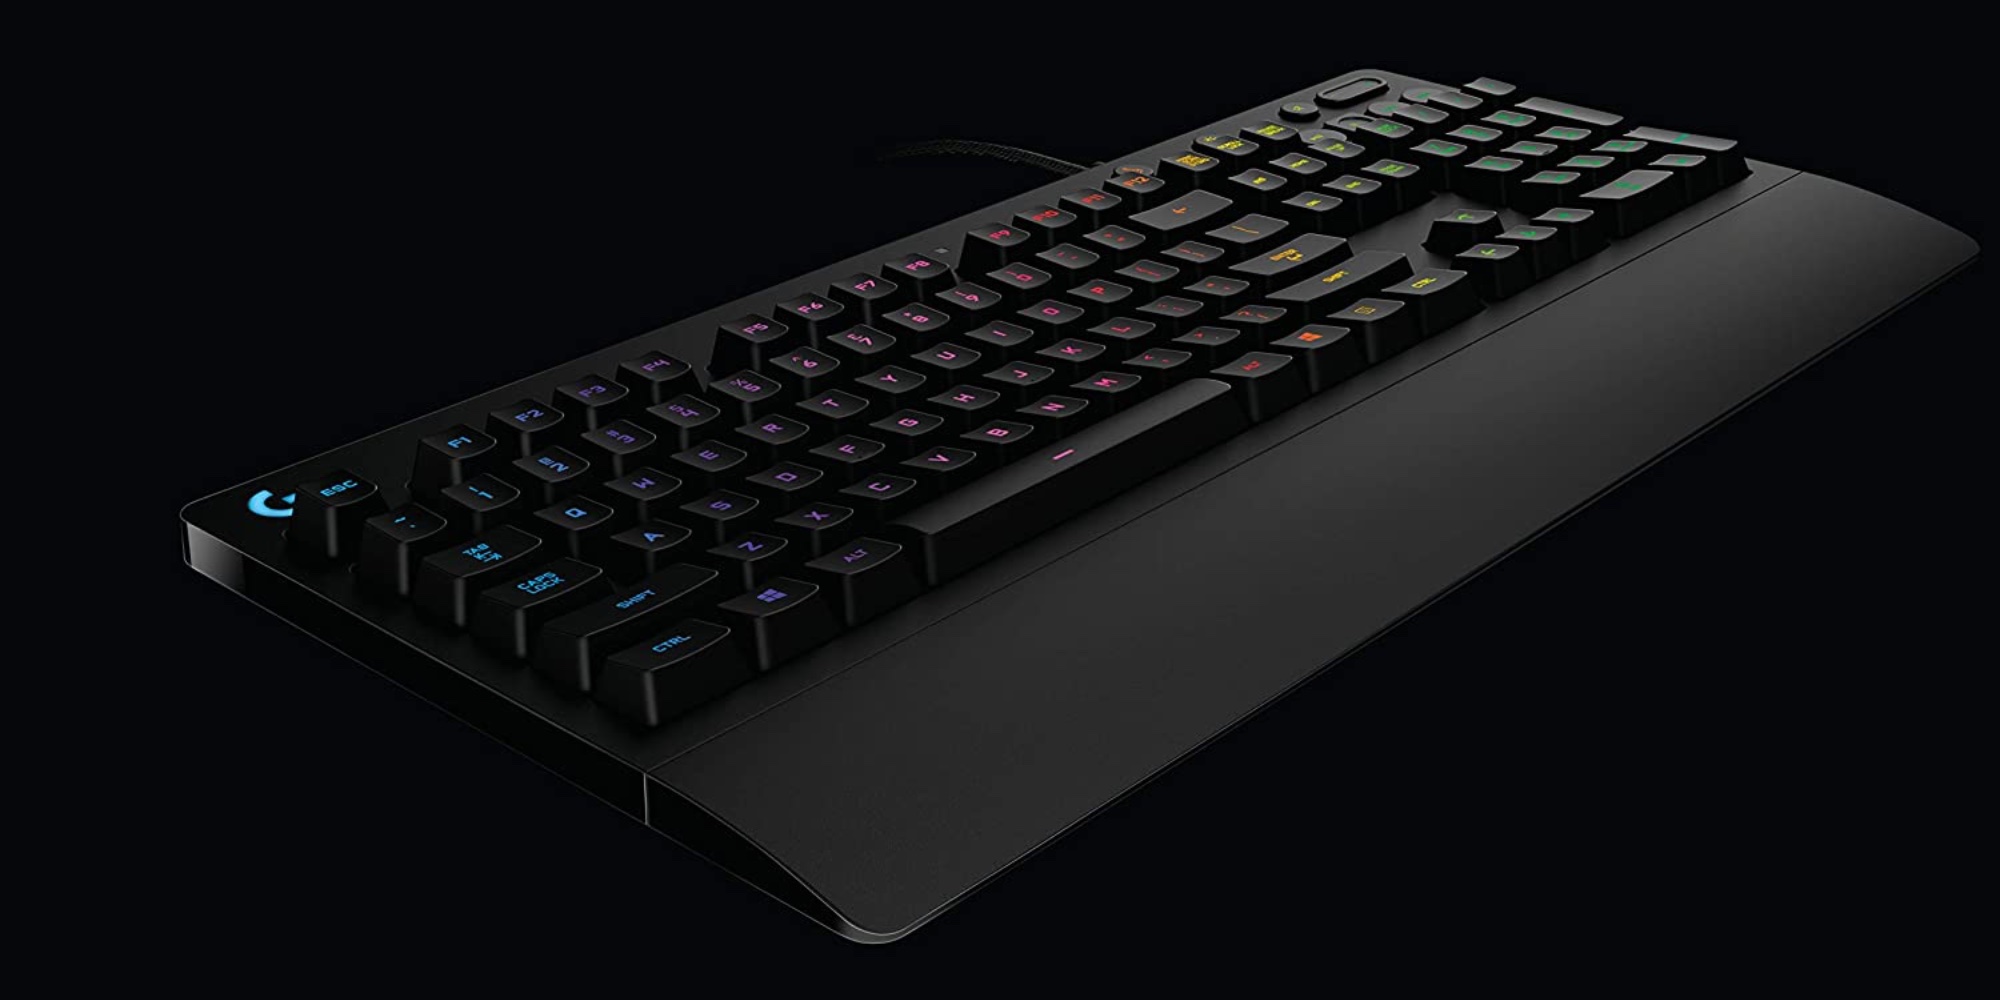 Logitech G213 Keyboard for Gaming with Mech-Dome Keys